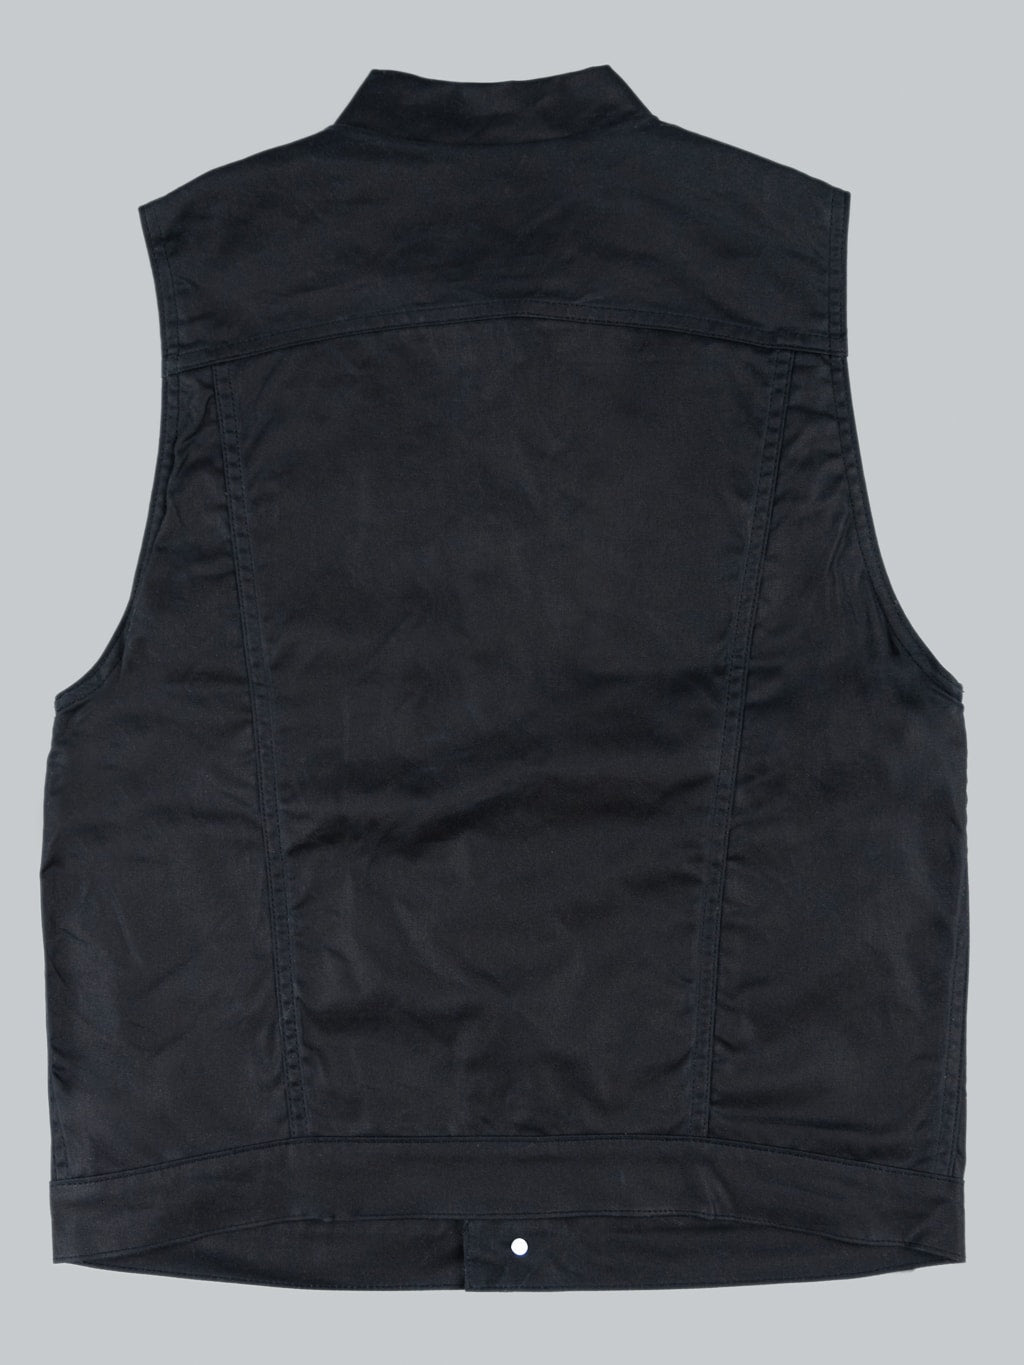 rogue territory lined waxed canvas supply vest 8.25oz black back